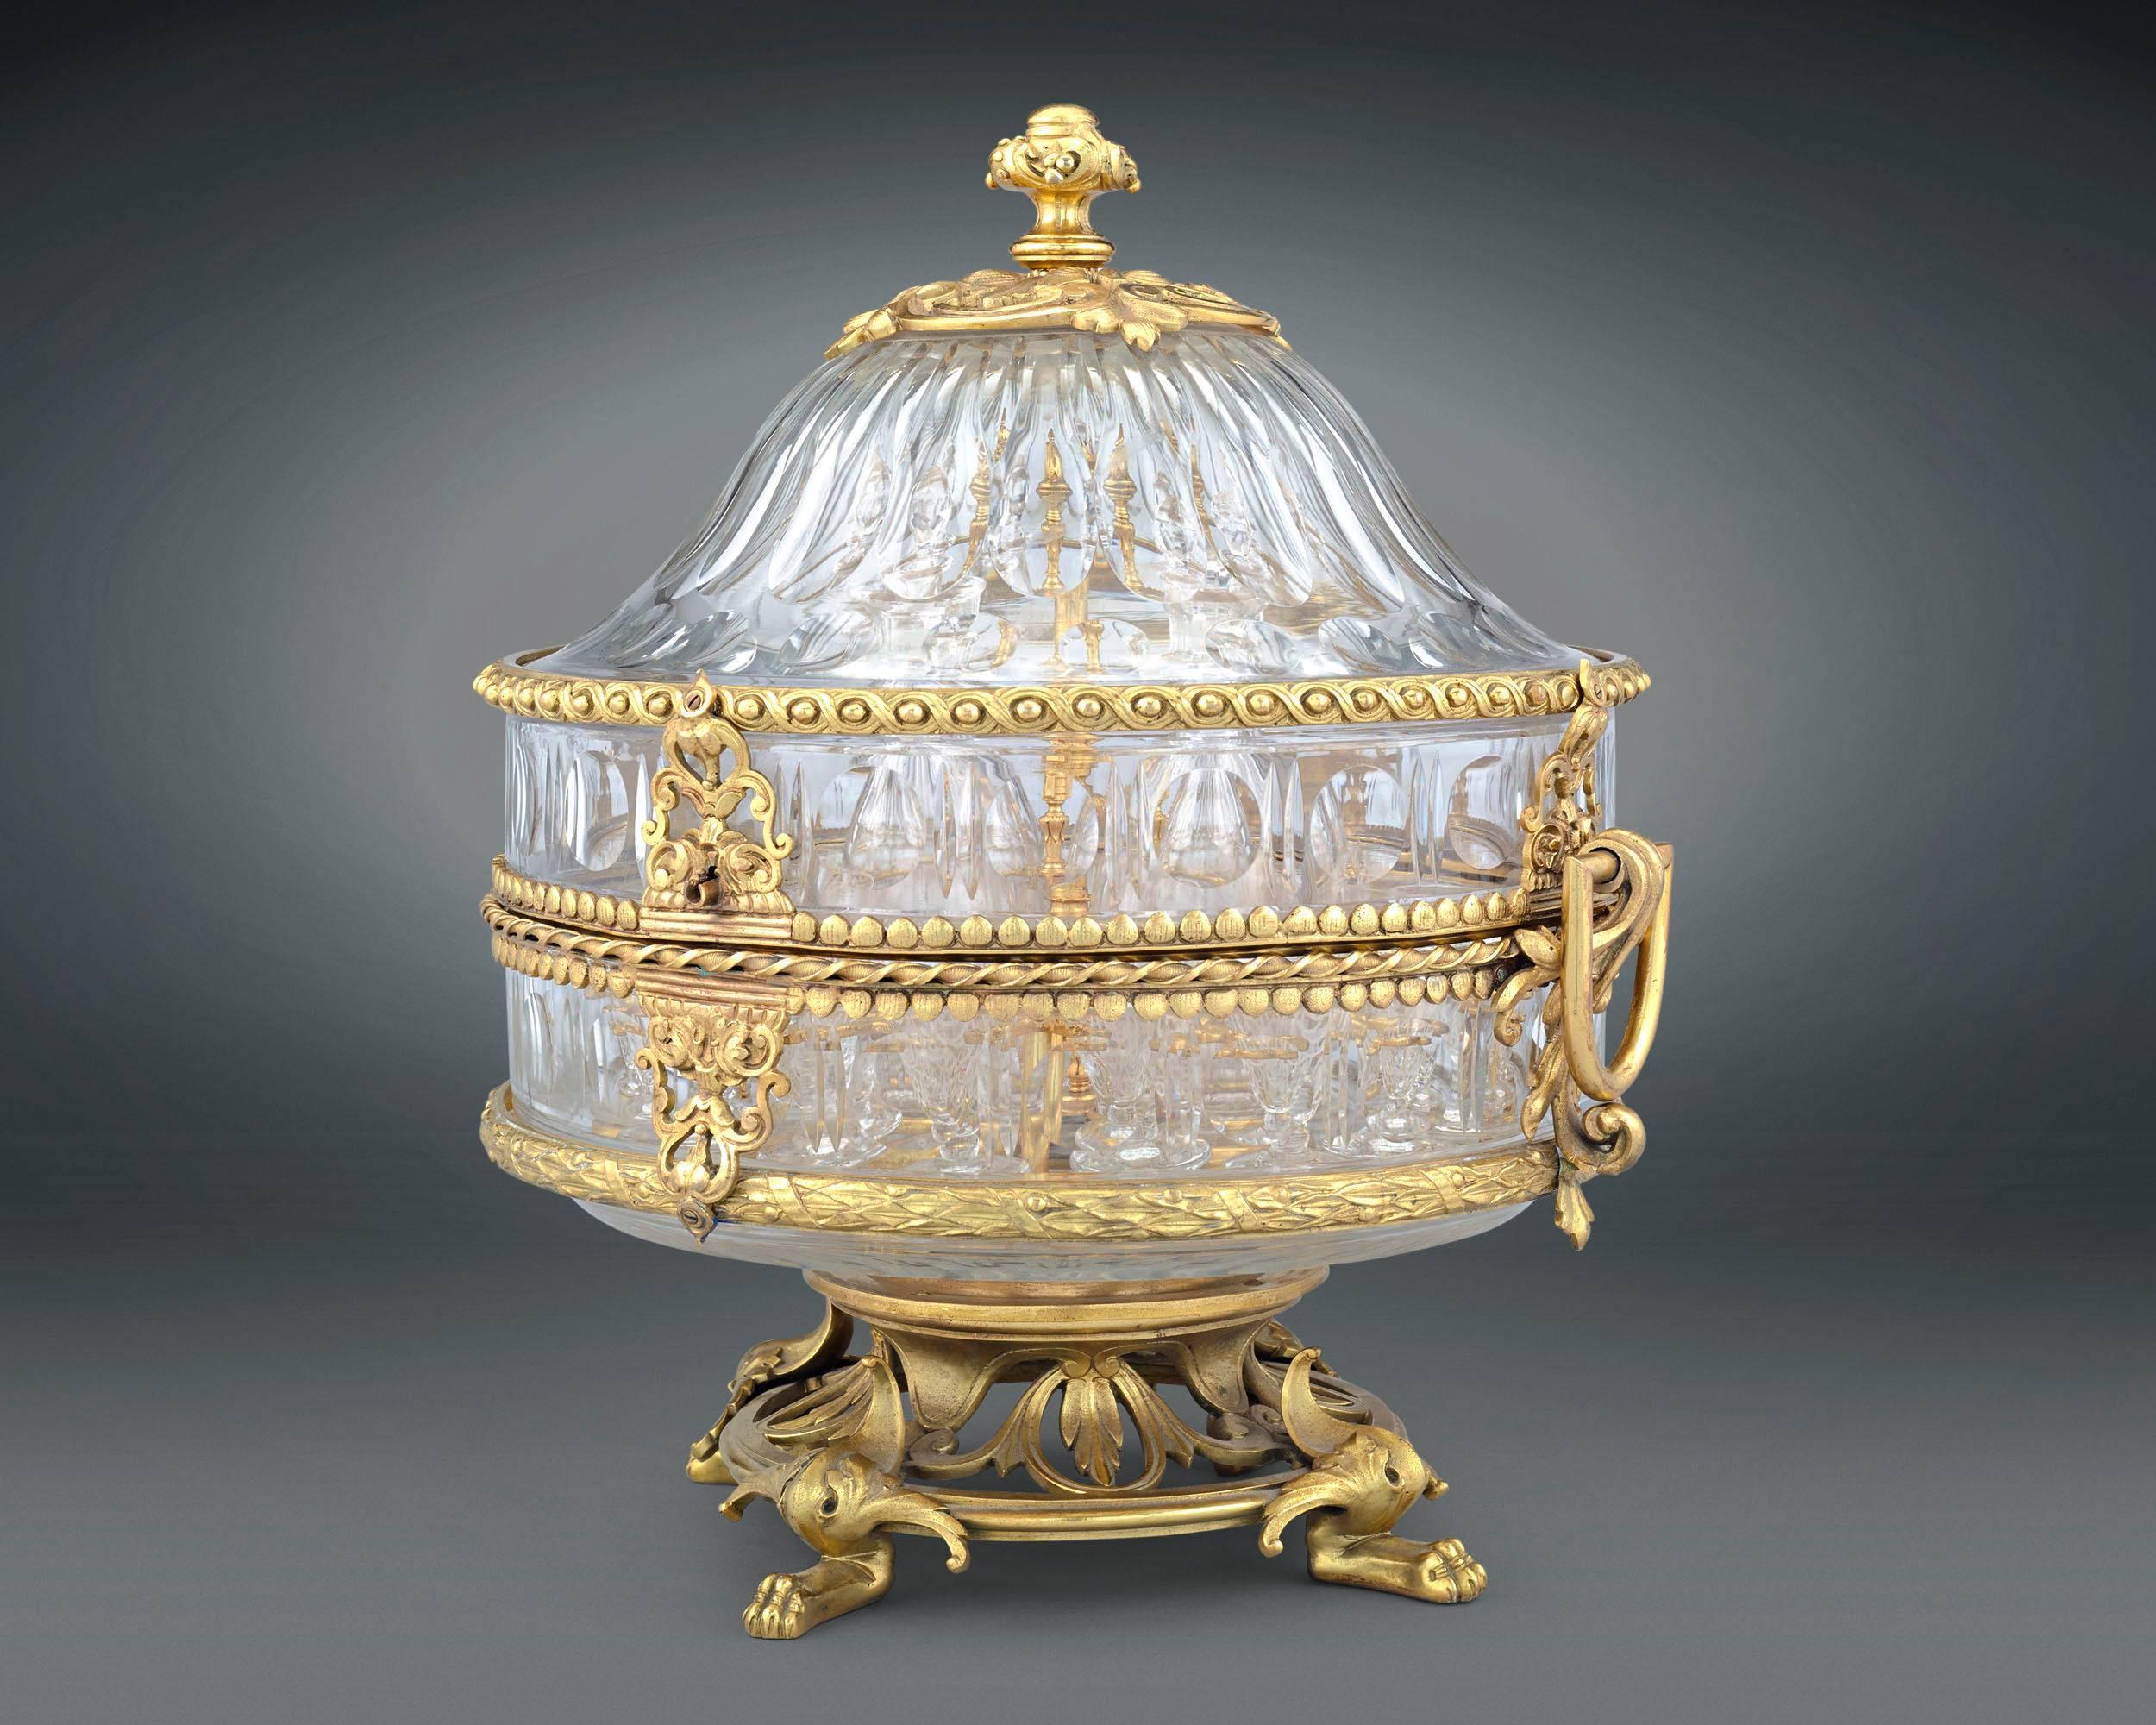 Doré bronze accents lend a touch of luxury to this stunning Napoleon III crystal cave à liqueur. The lush design embodies the abundance of the Napoleon III style, bringing together elements of the neoclassical and the Rococo Revival. An object of